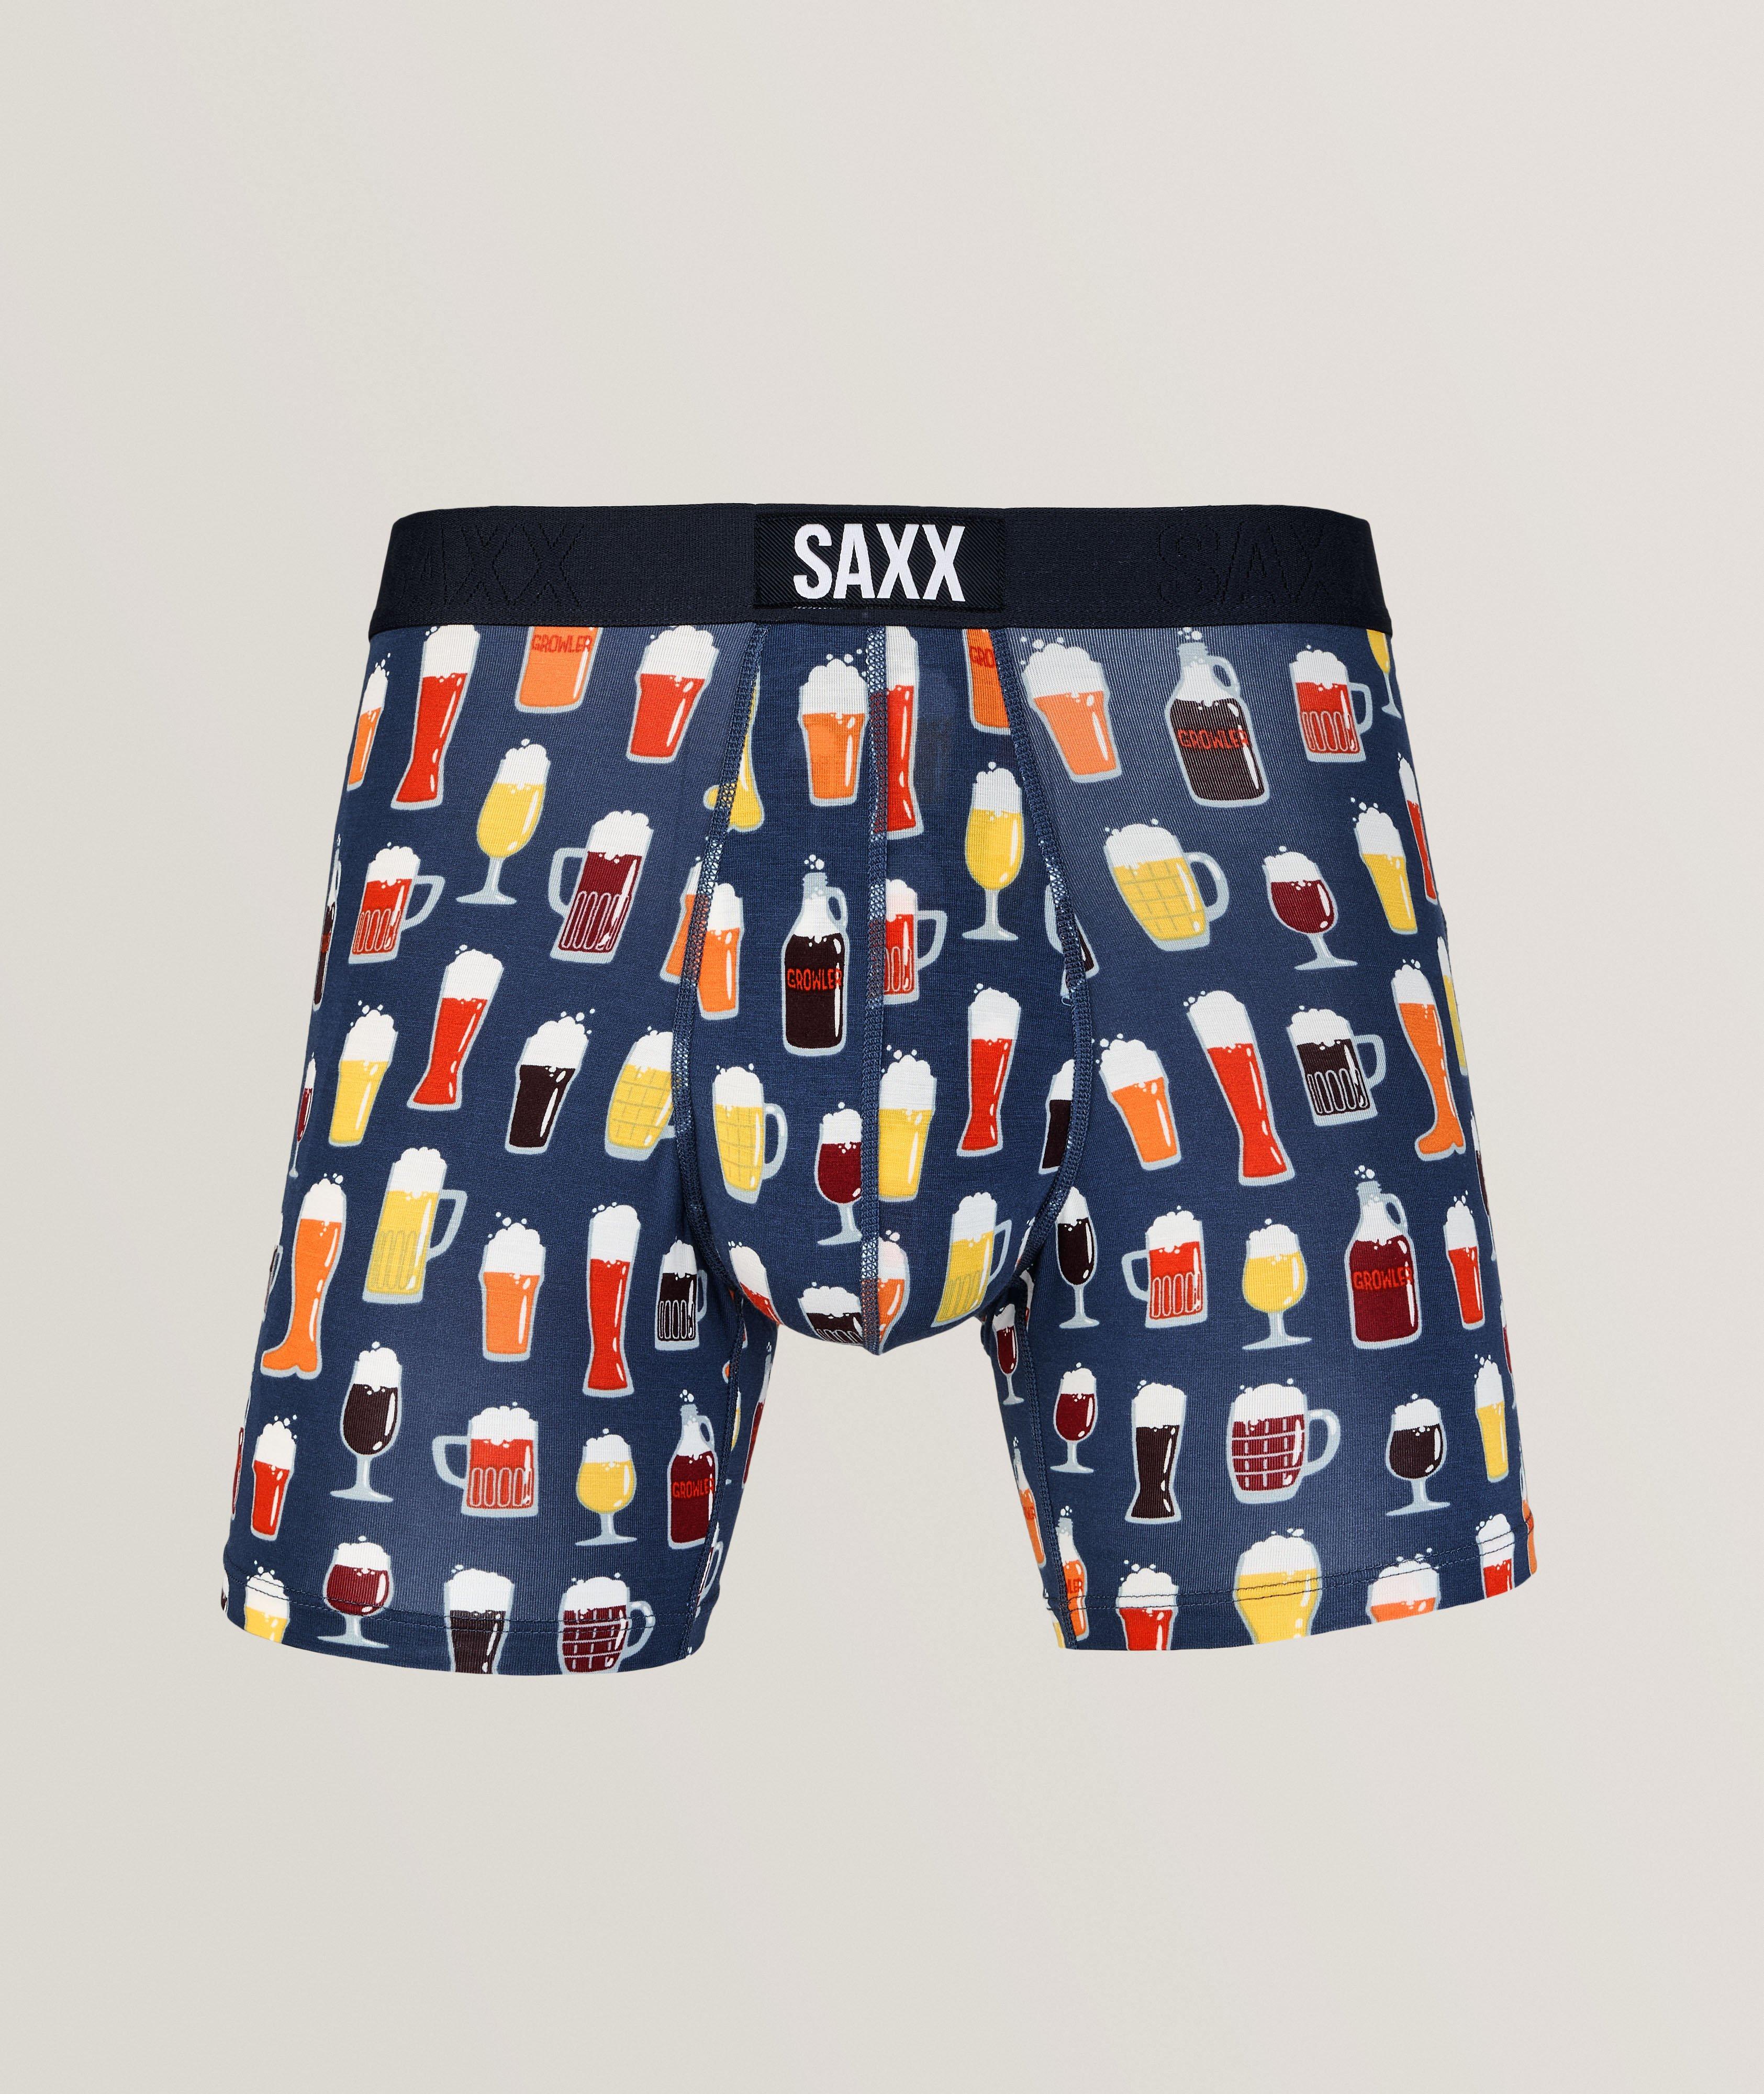 Pitcher Perfect Vibe Super Soft Boxers image 0